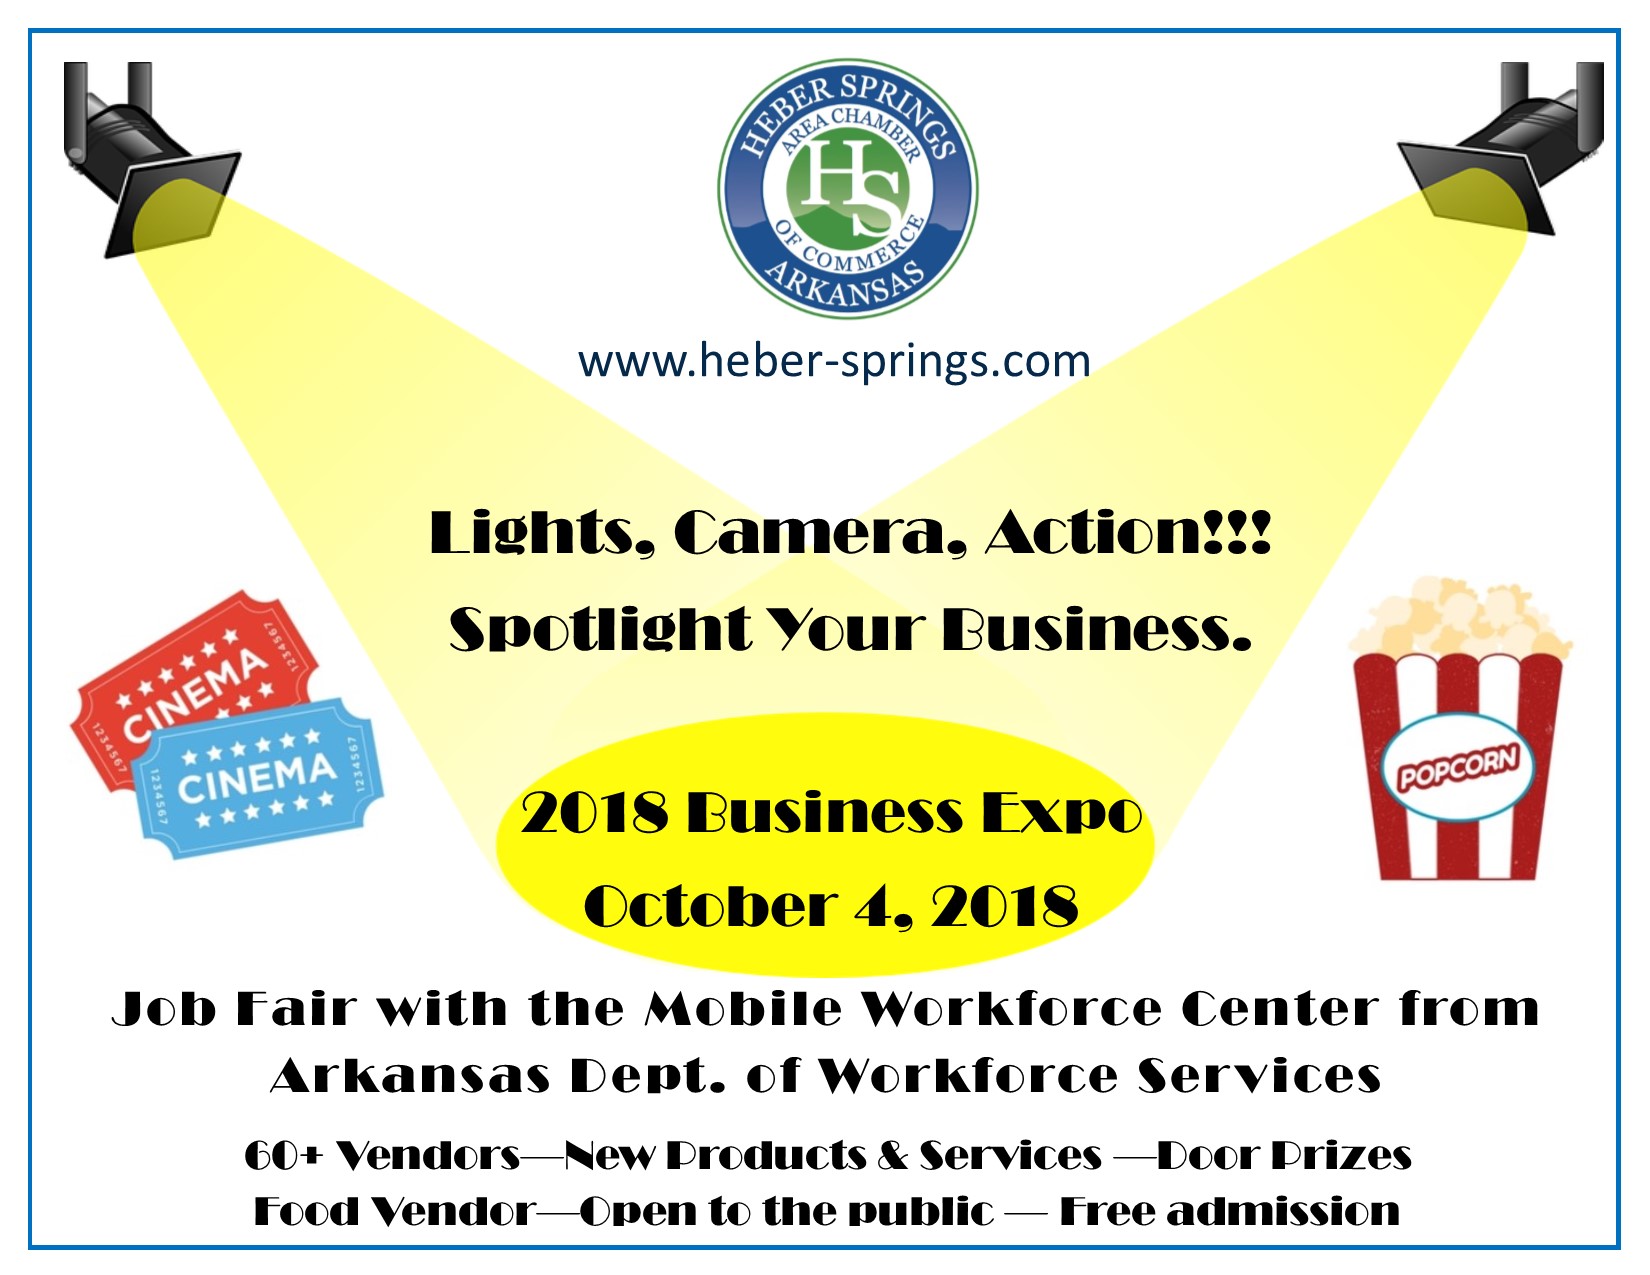 16th Annual Business Expo